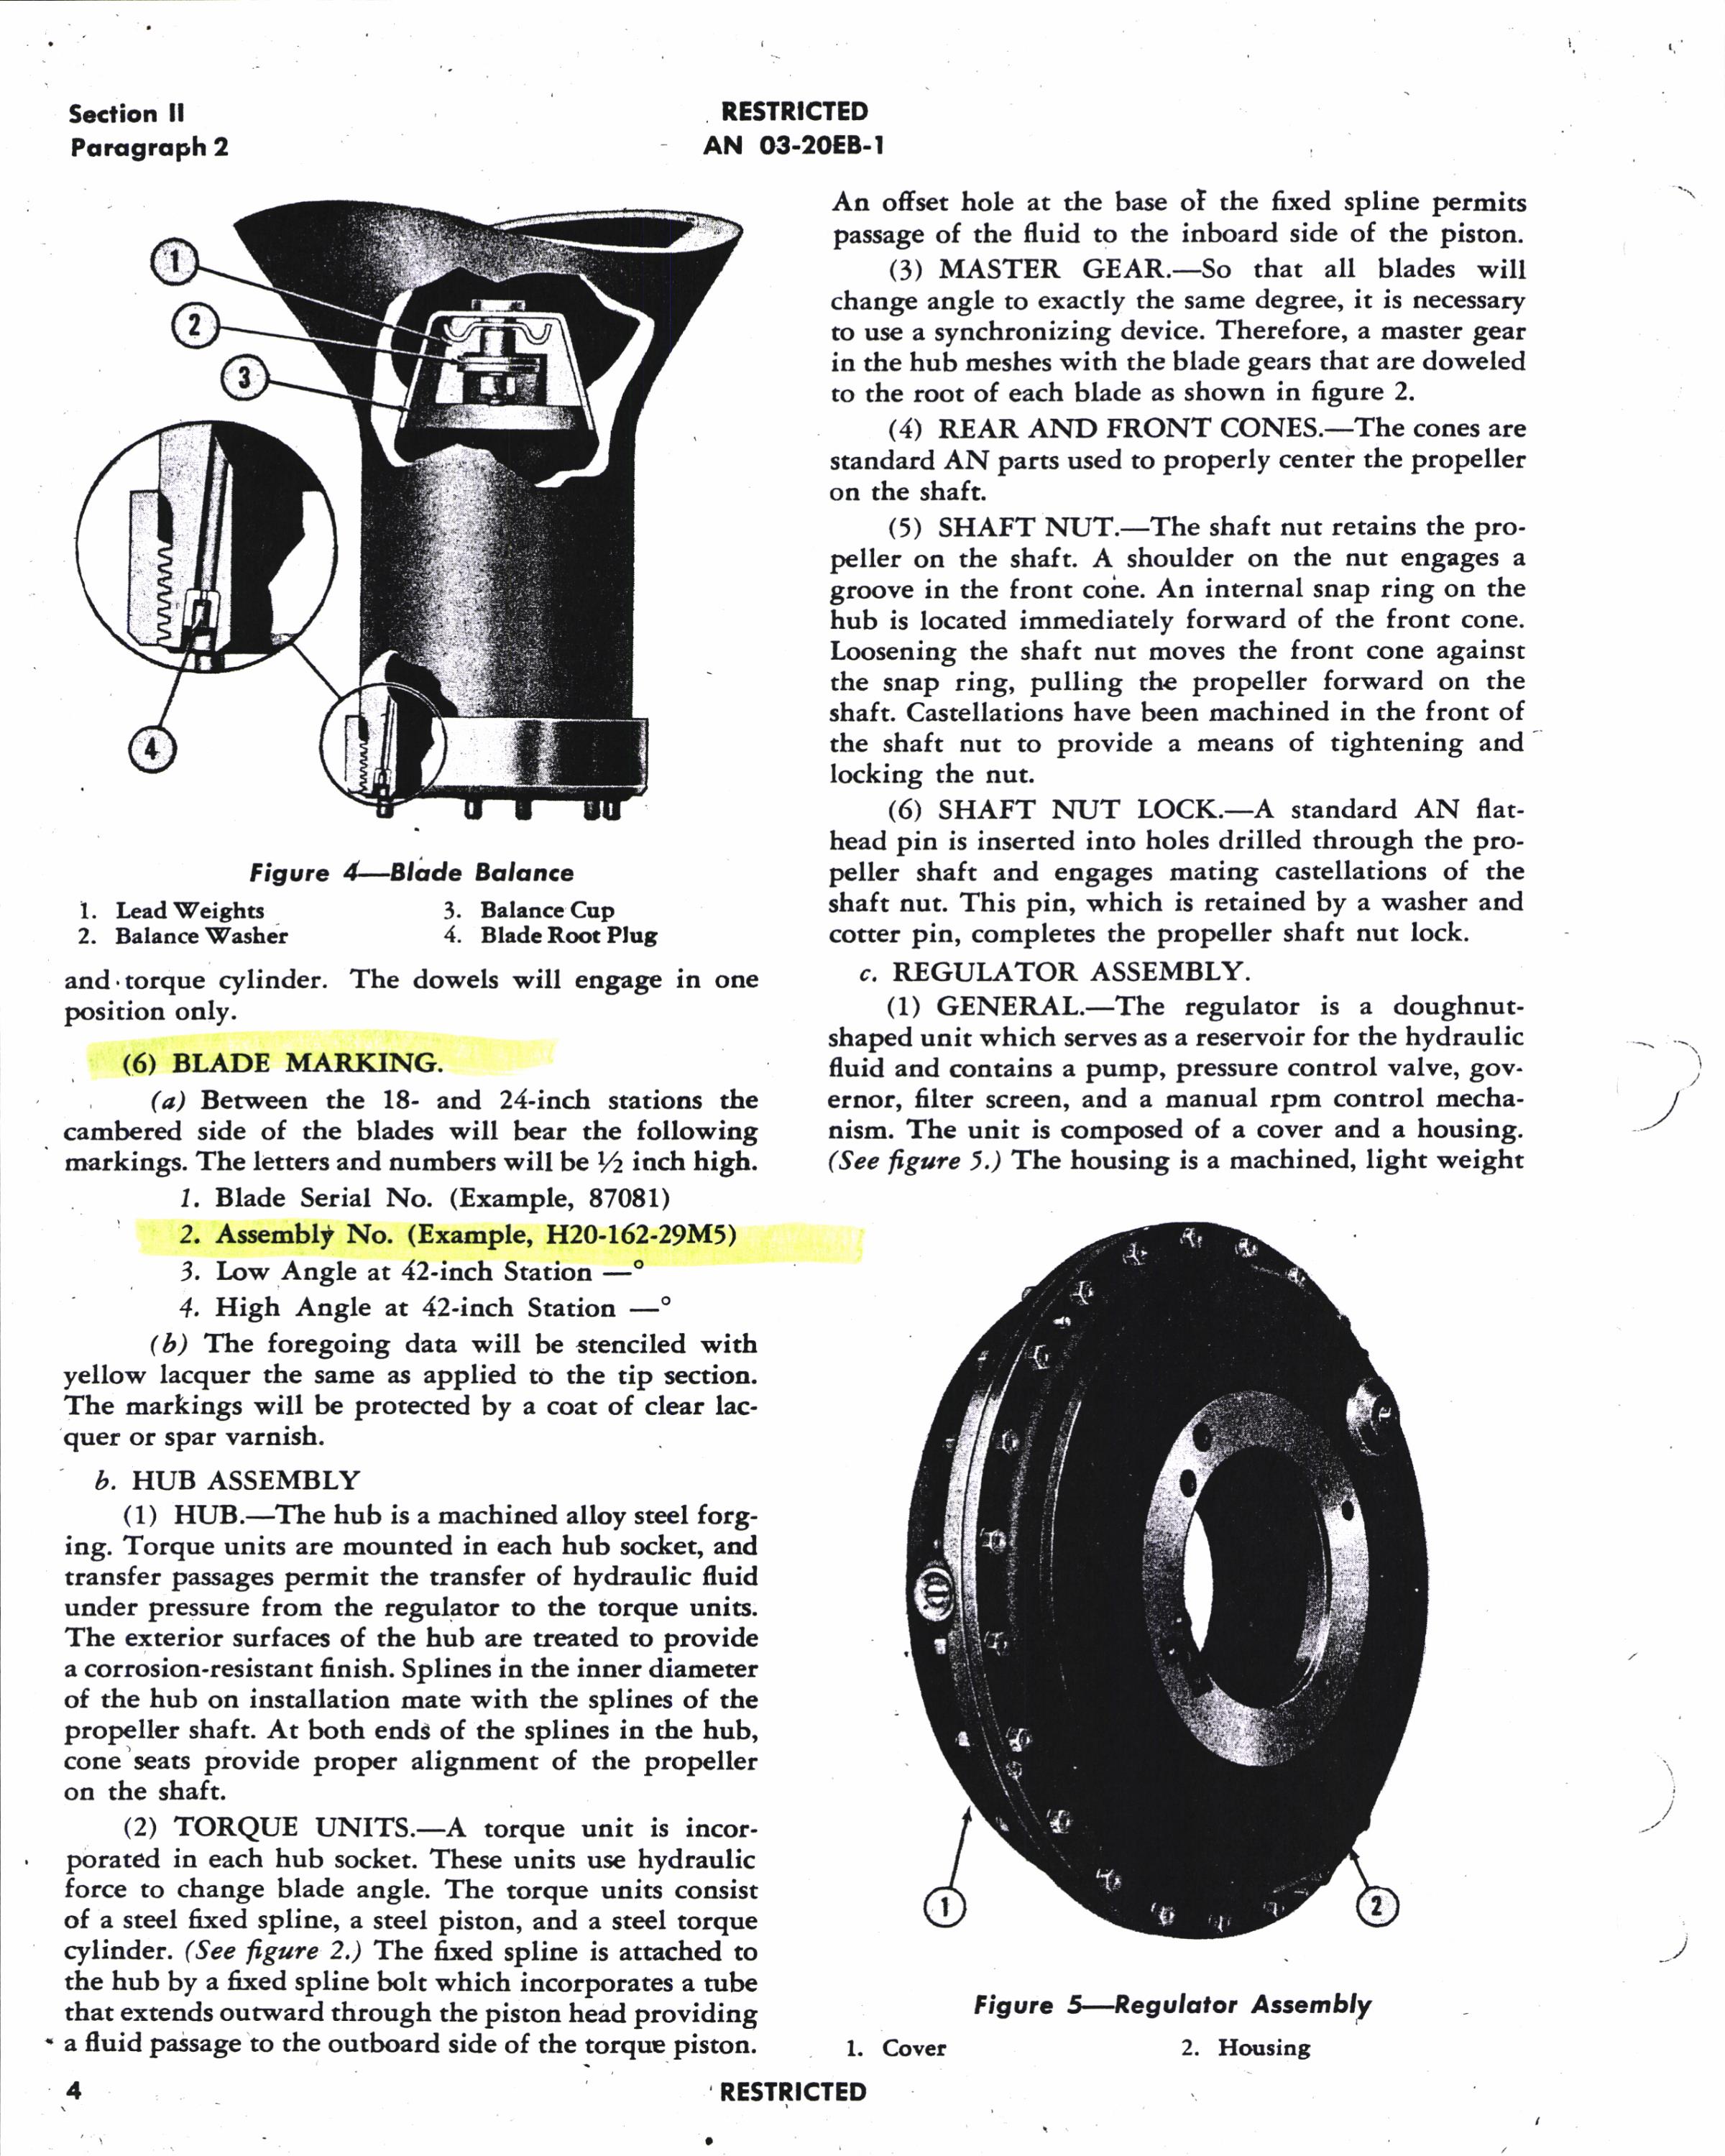 Sample page 5 from AirCorps Library document: Handbook of Instructions with Parts Catalog for Hydraulic Controllable Propellers Models A542-B1 and -B2